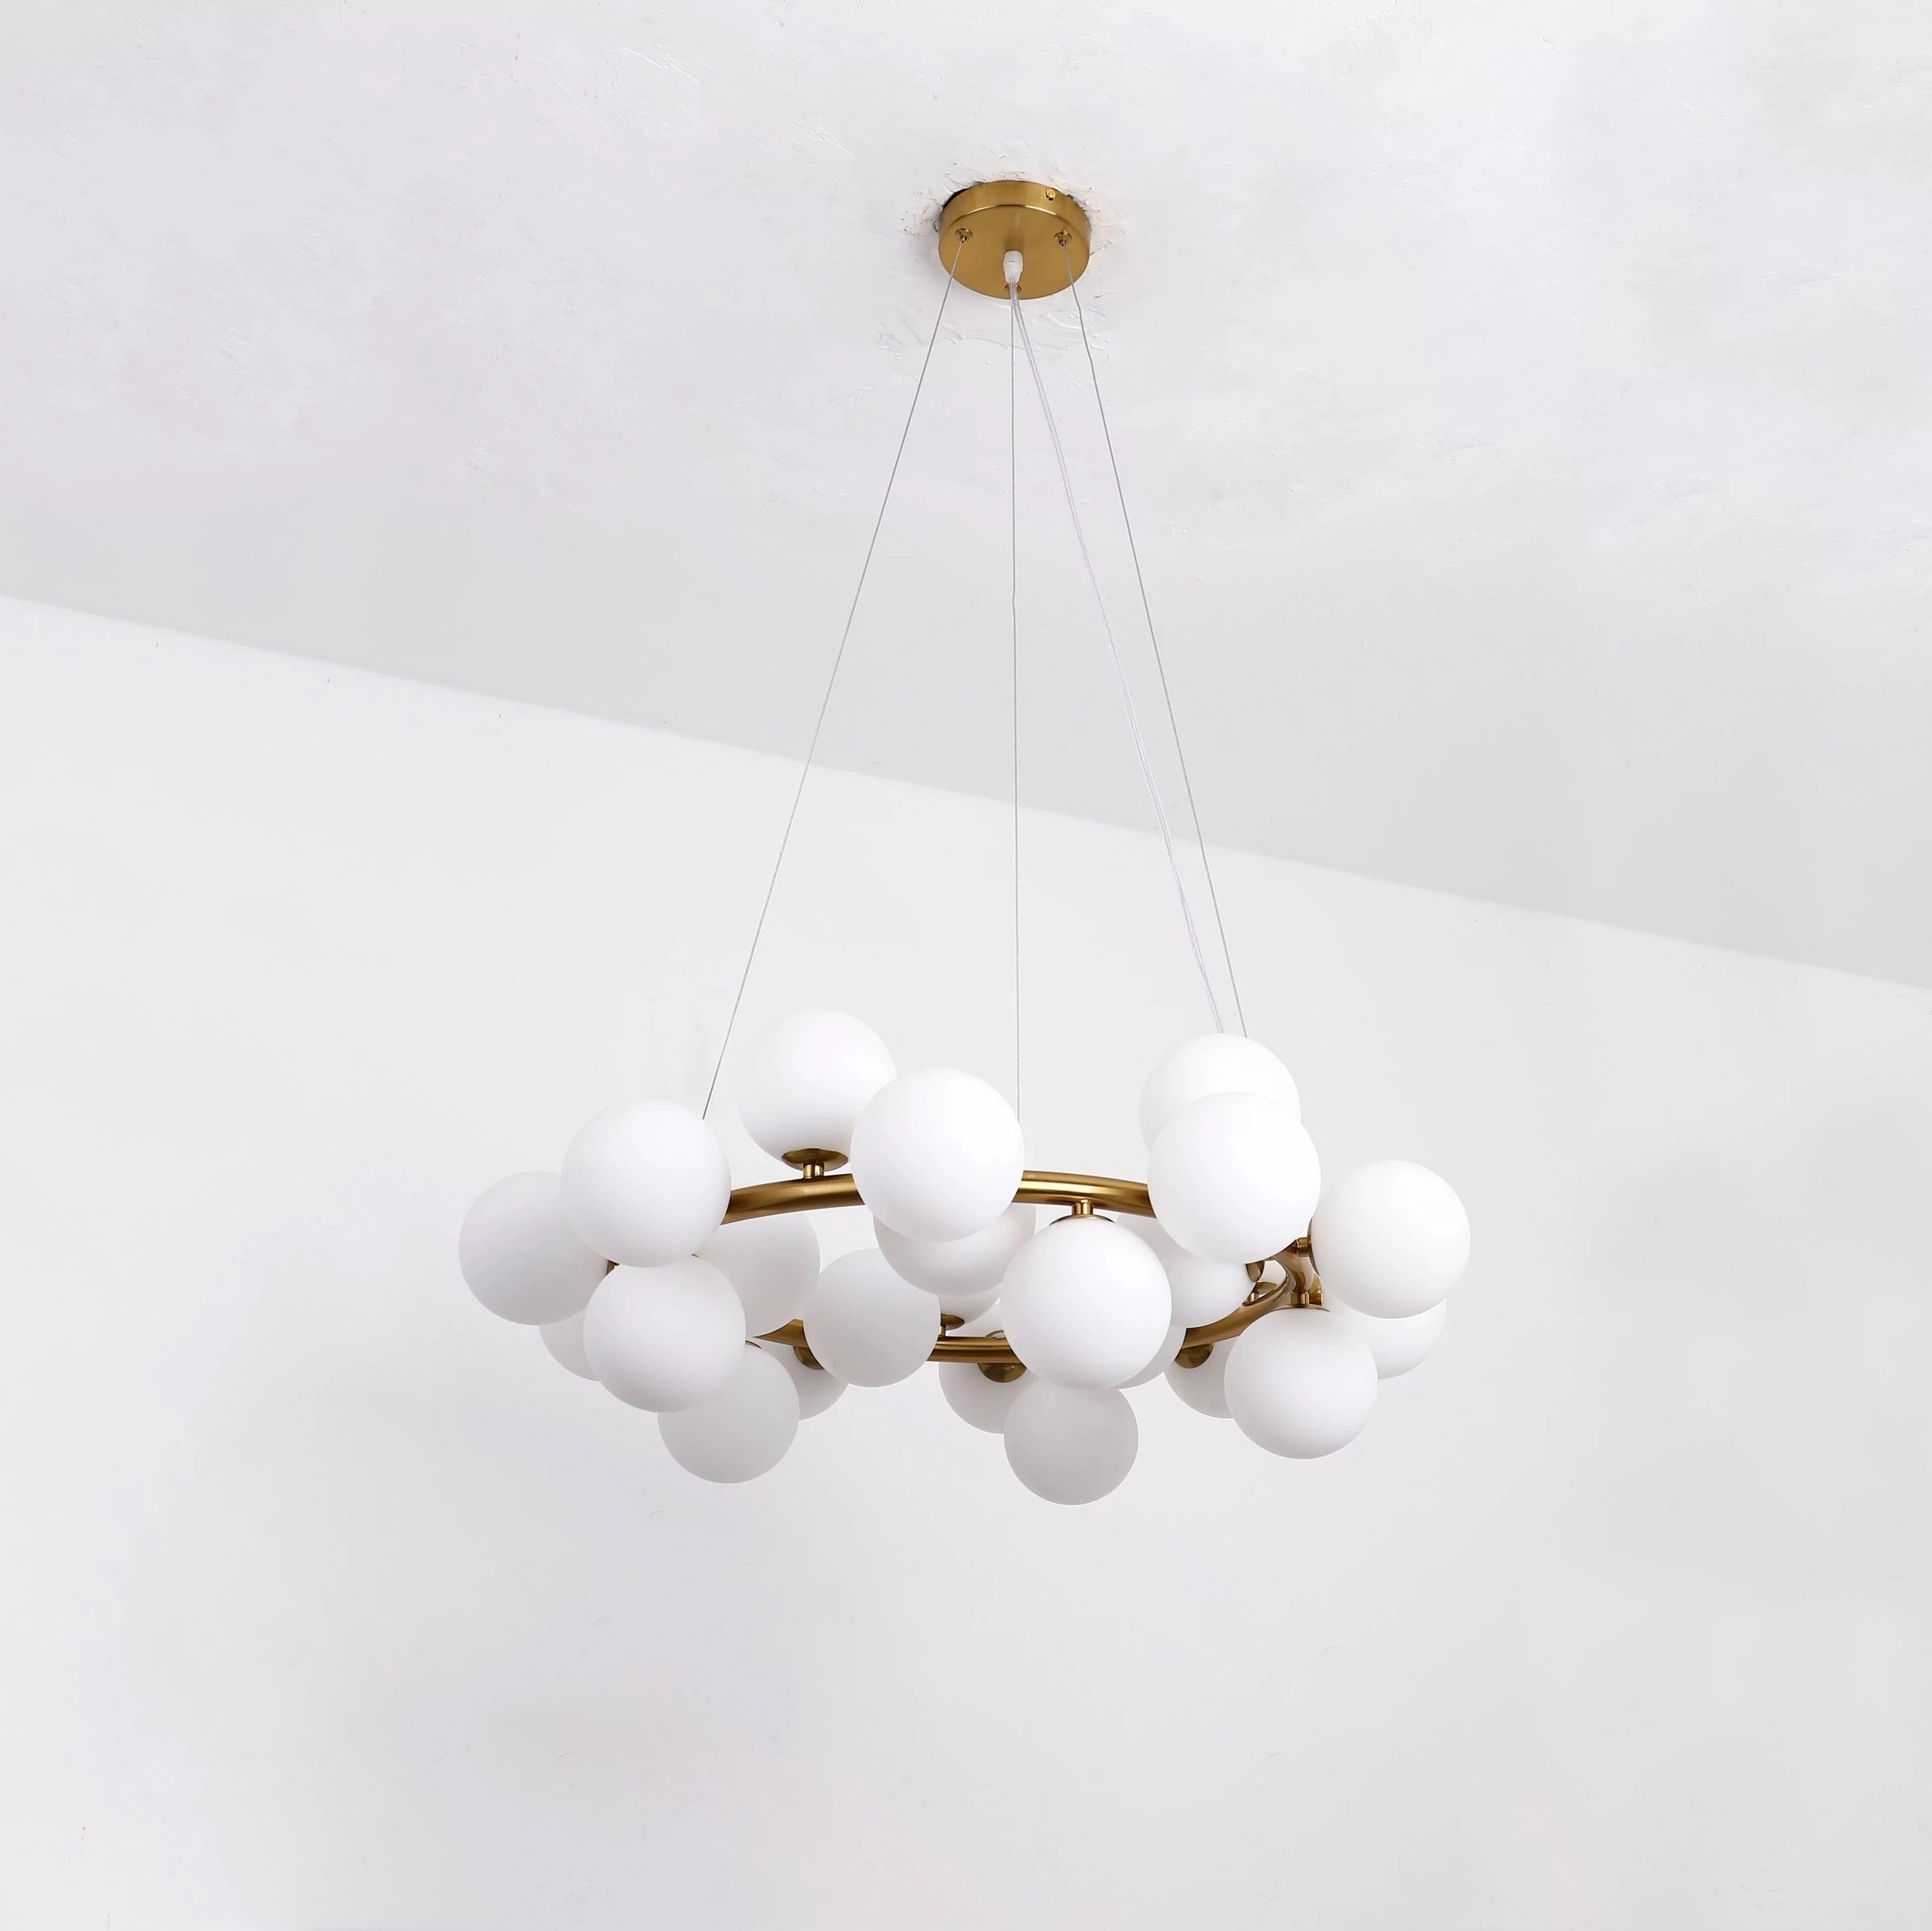 Gold Color Chandelier with 25 Lights Bulbs Dimension: 75 CM